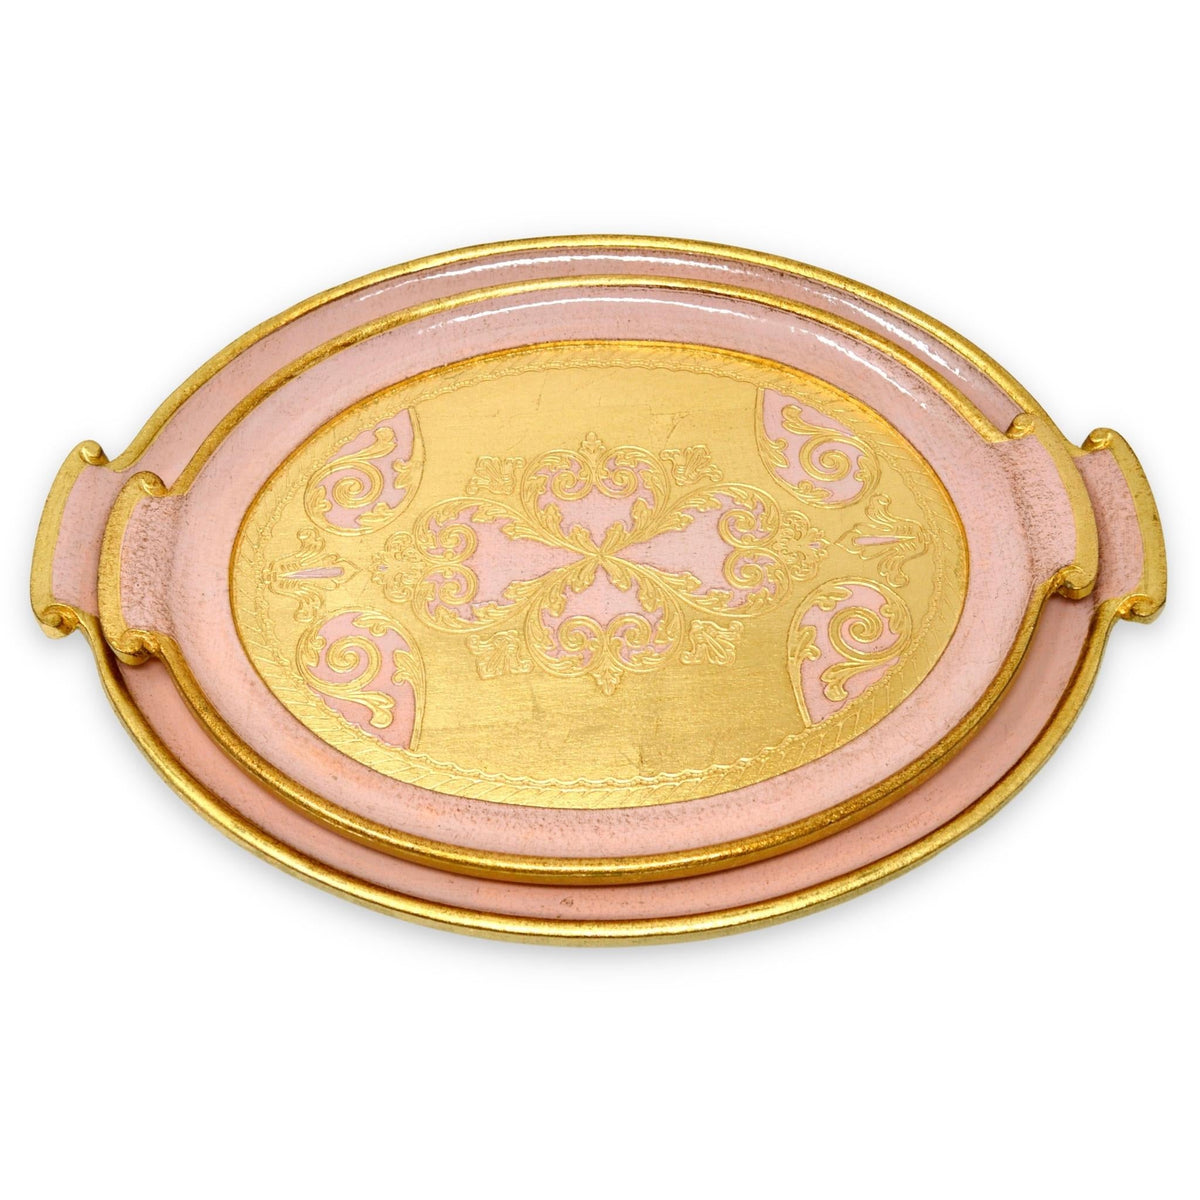 Florentine Carved Gilded Wood, Oval with Handle Trays, Set of 2, Made in Italy - My Italian Decor